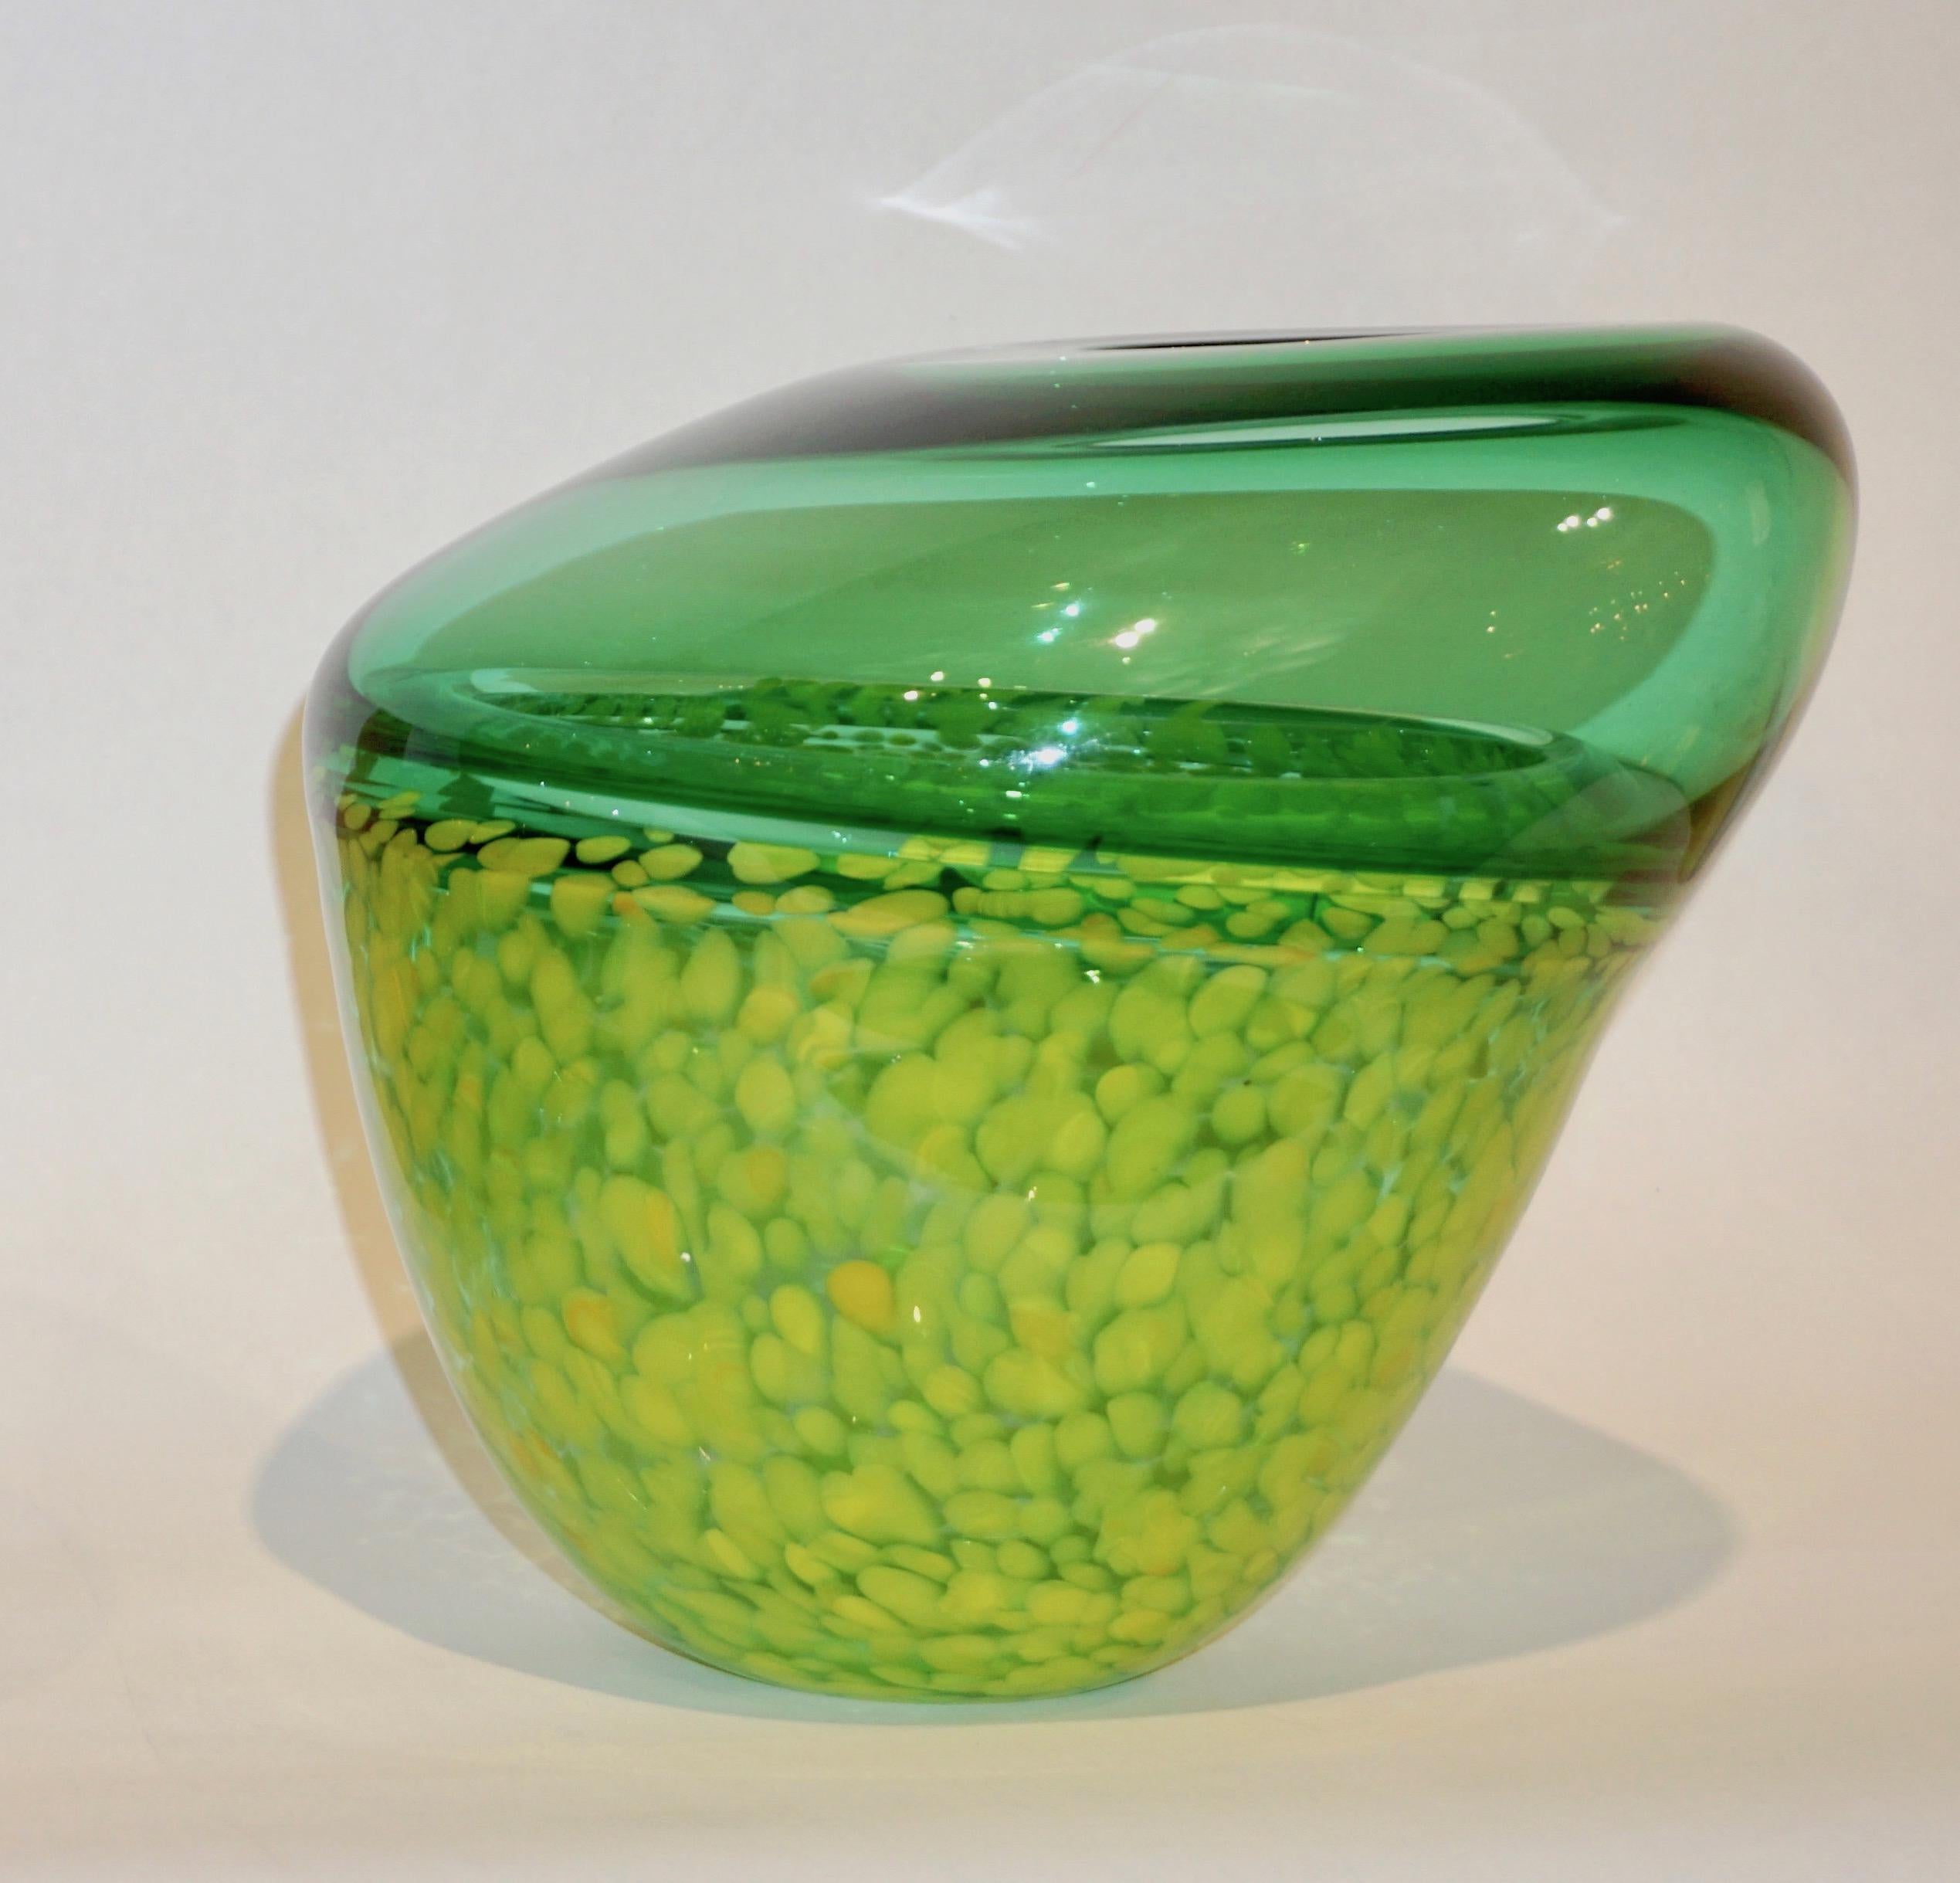 A one-of-a-kind organic modern art glass sculpture signed by Hilton McConnico, designed and blown in the 1990s, part of an exclusive collection of unique pieces designed for Formia, Murano.
This lime green and yellow vase is executed with the